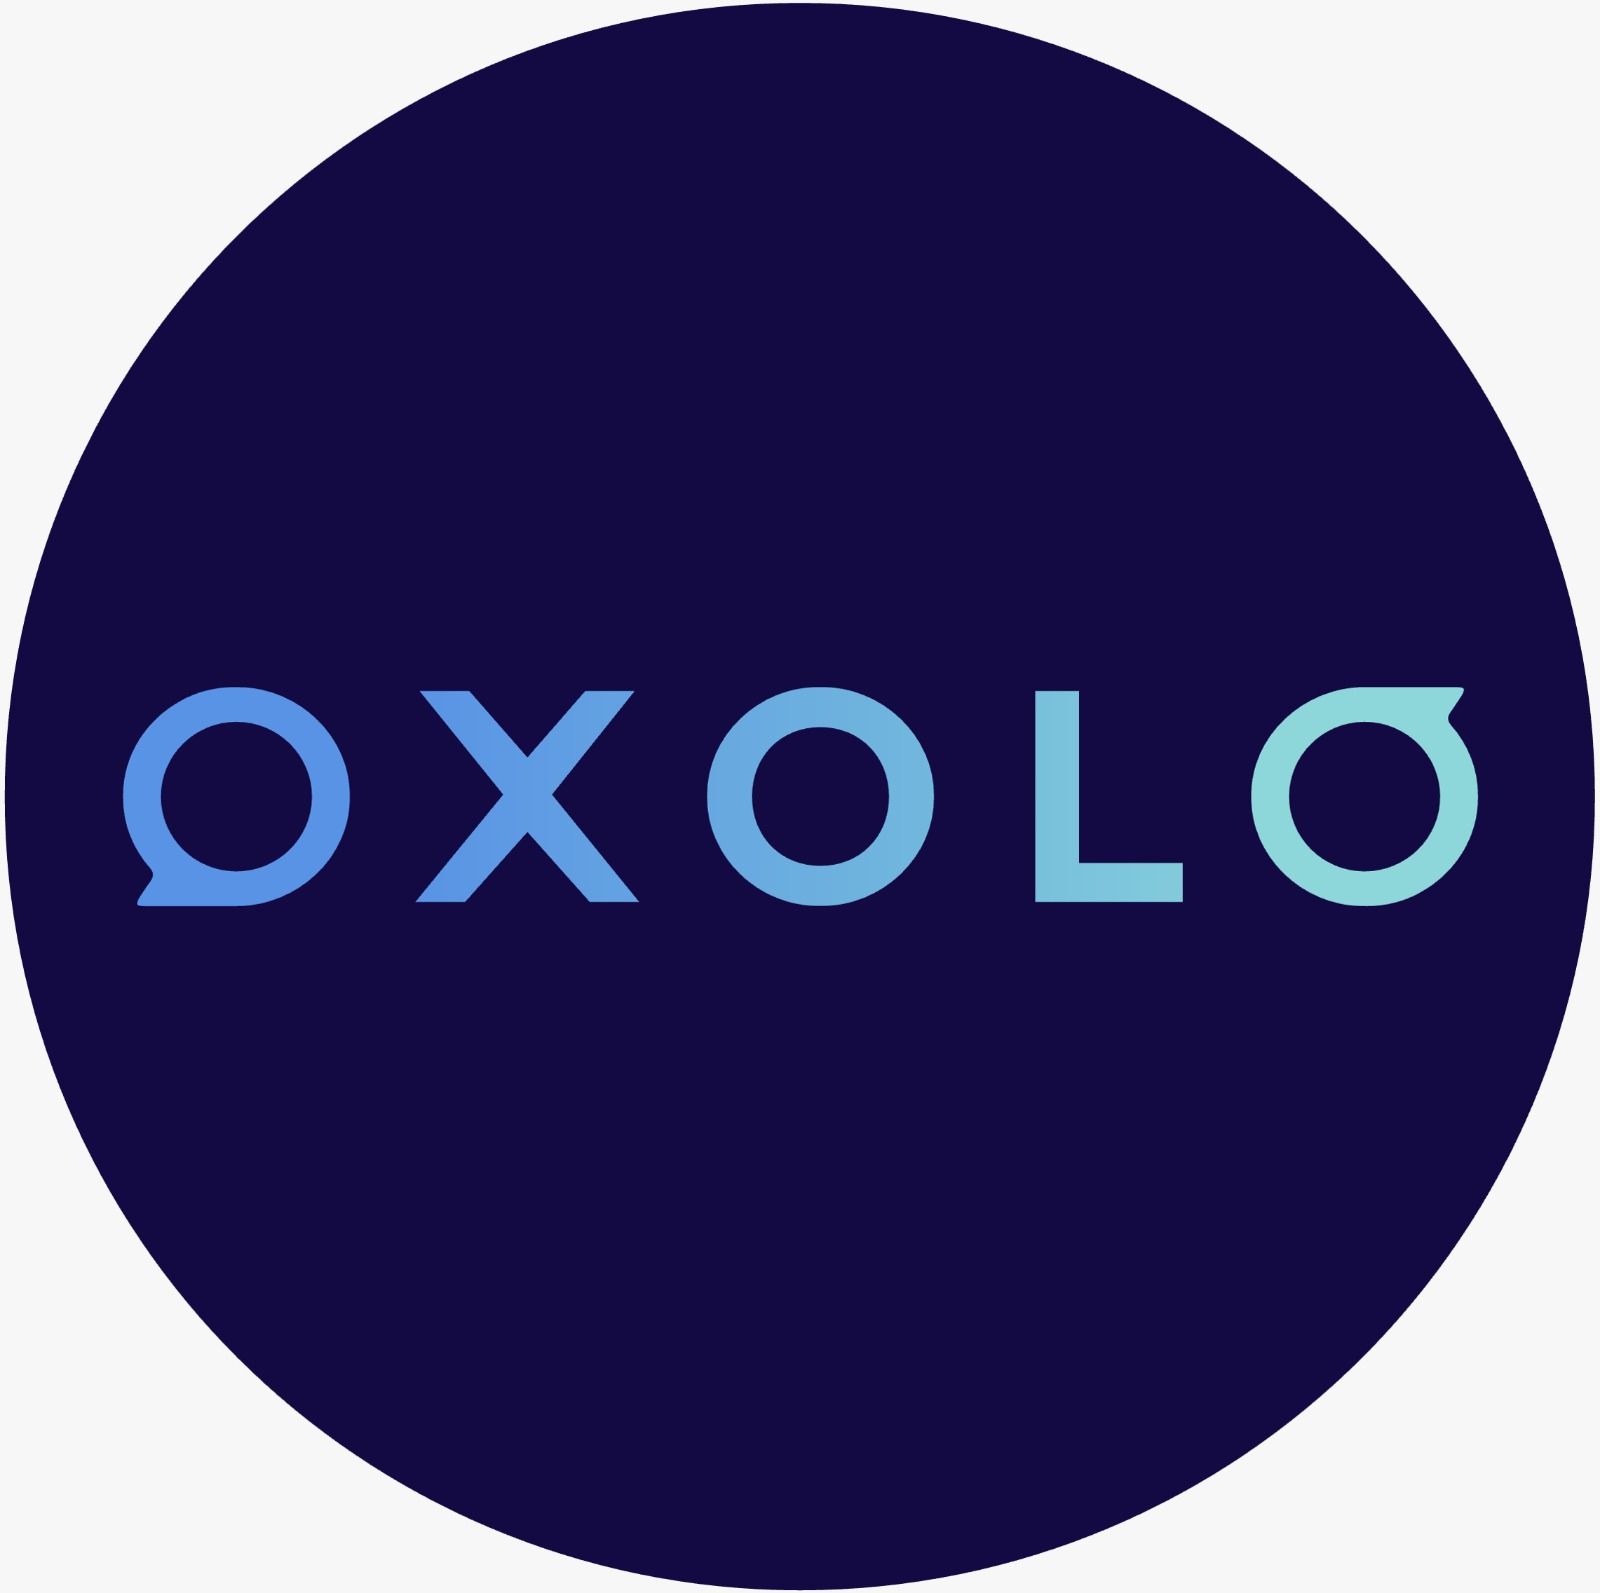 Oxolo Secures €13 Million in Series A Investment Round